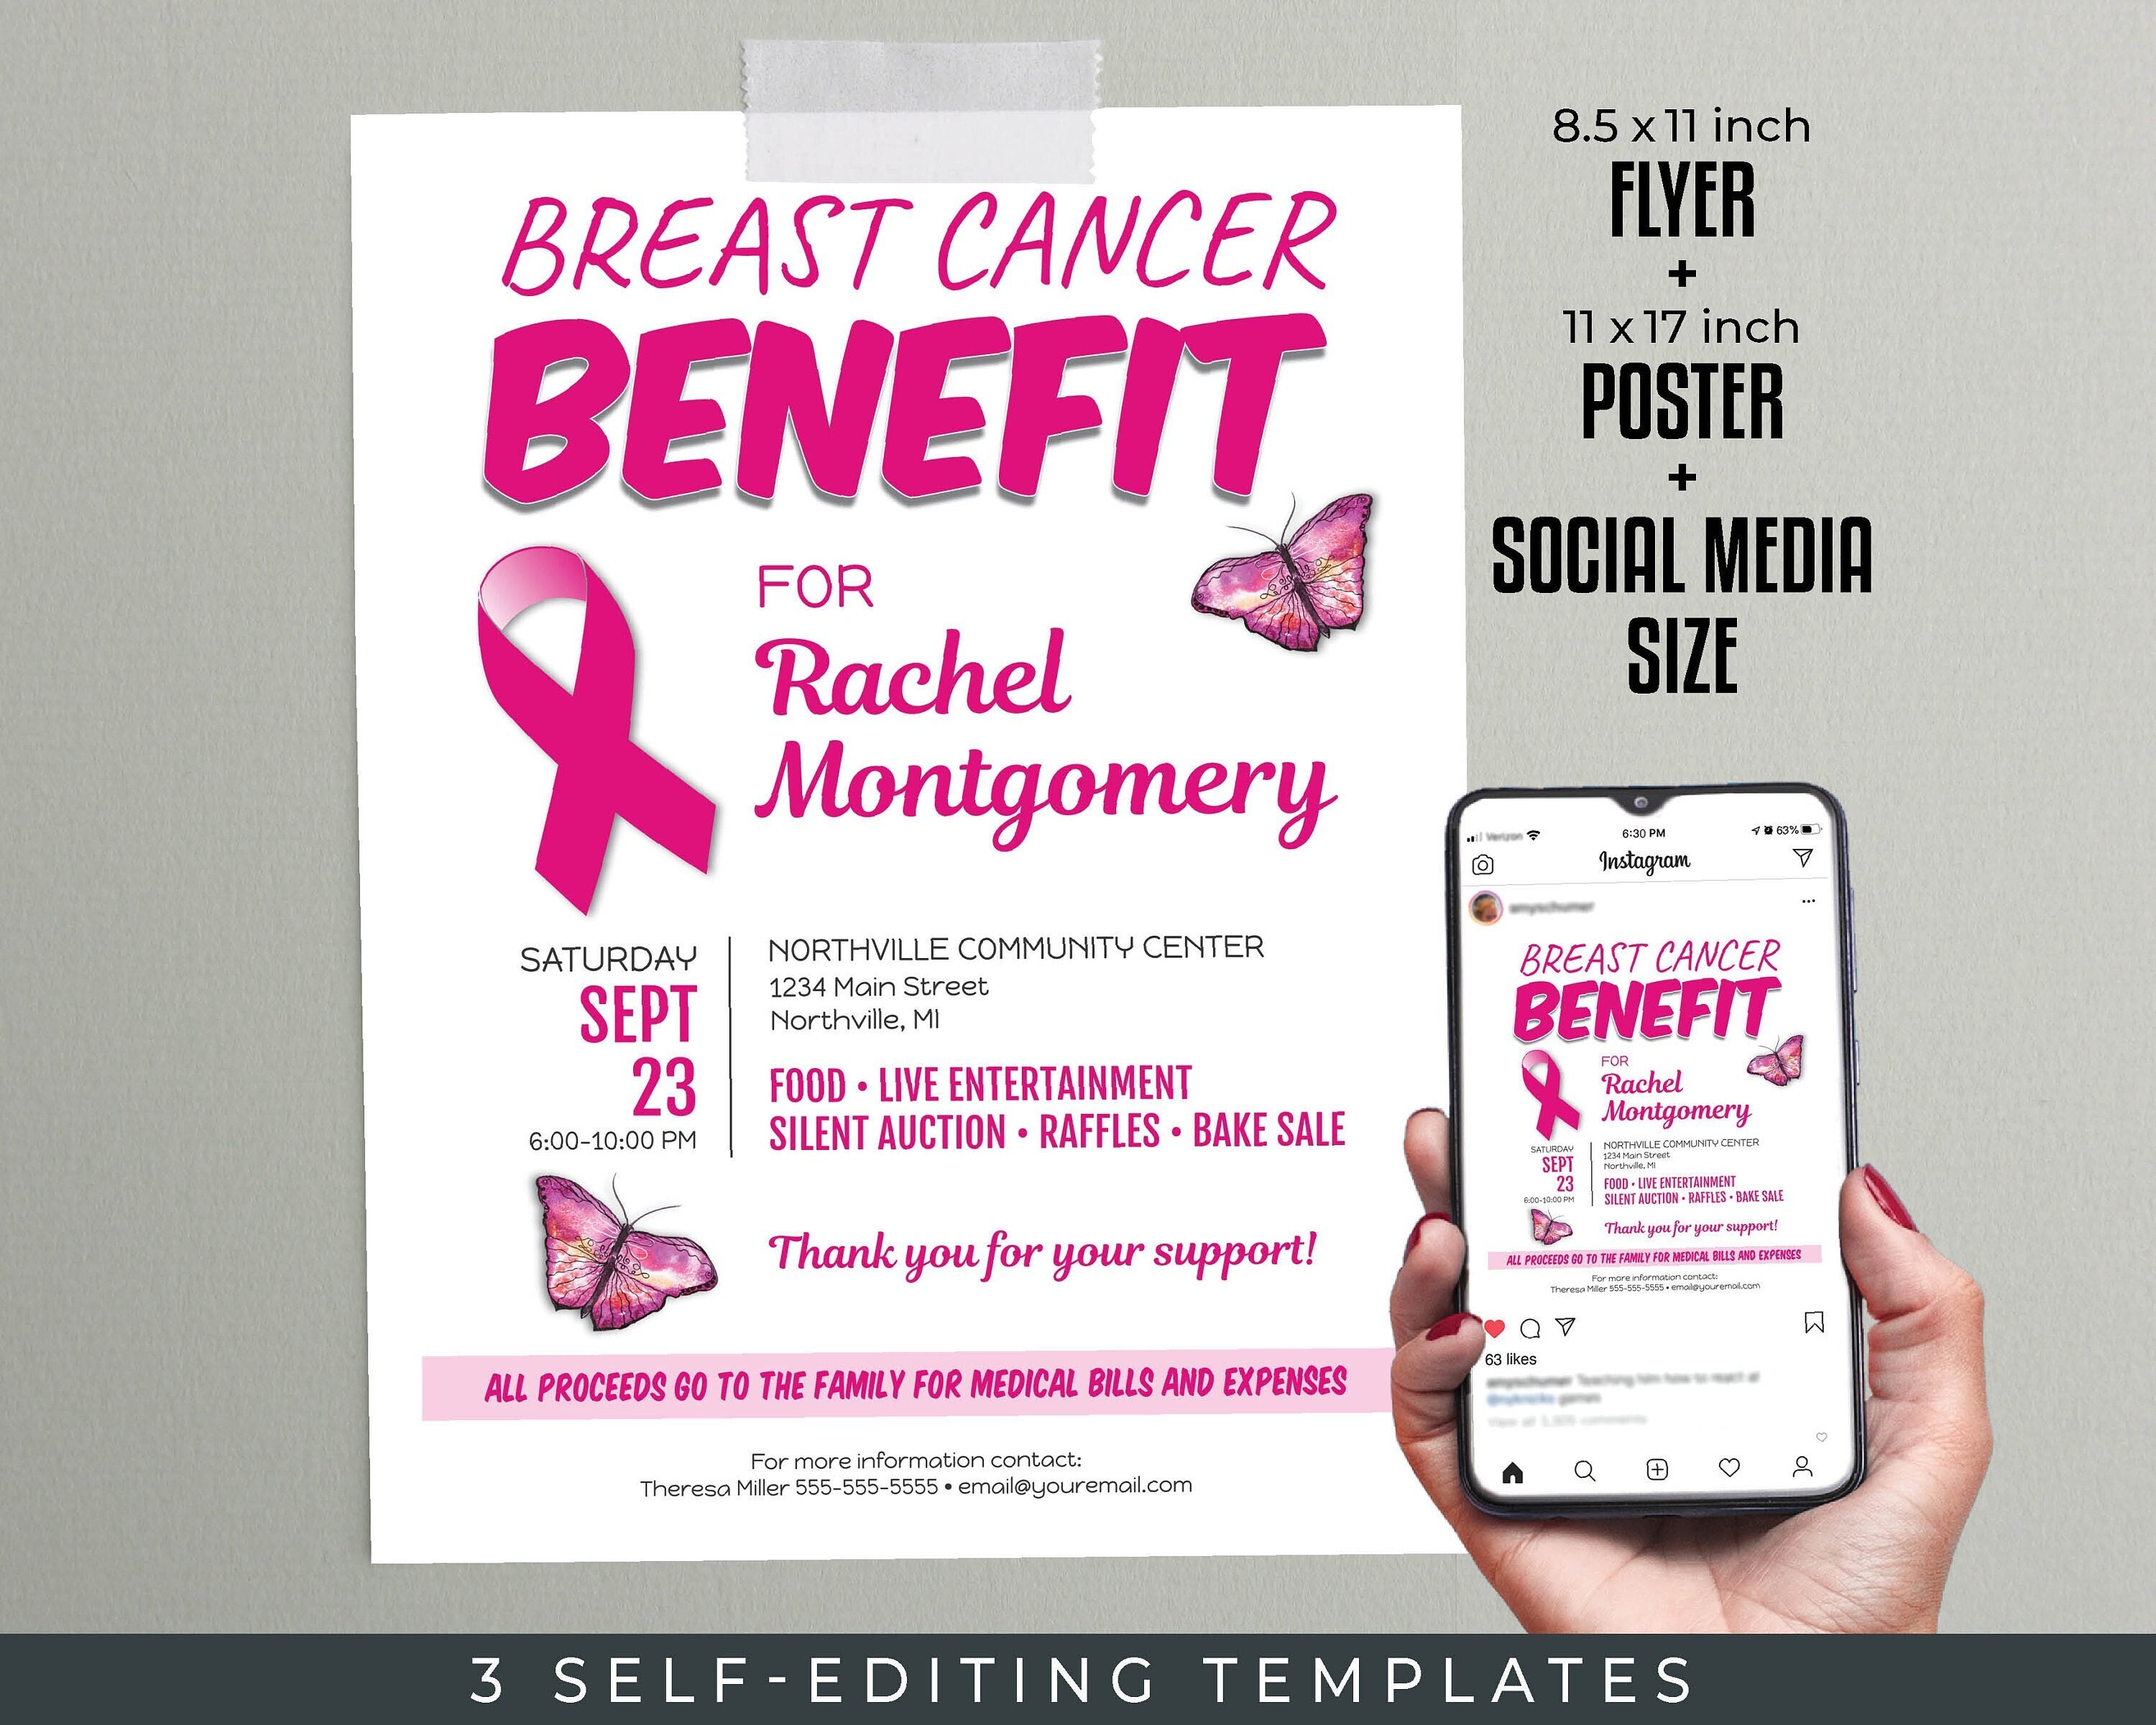 Cancer Support Group Flyers Template, Breast Cancer Support Group Flyer  Stock Vector - Illustration of disorder, pamphlet: 237935307